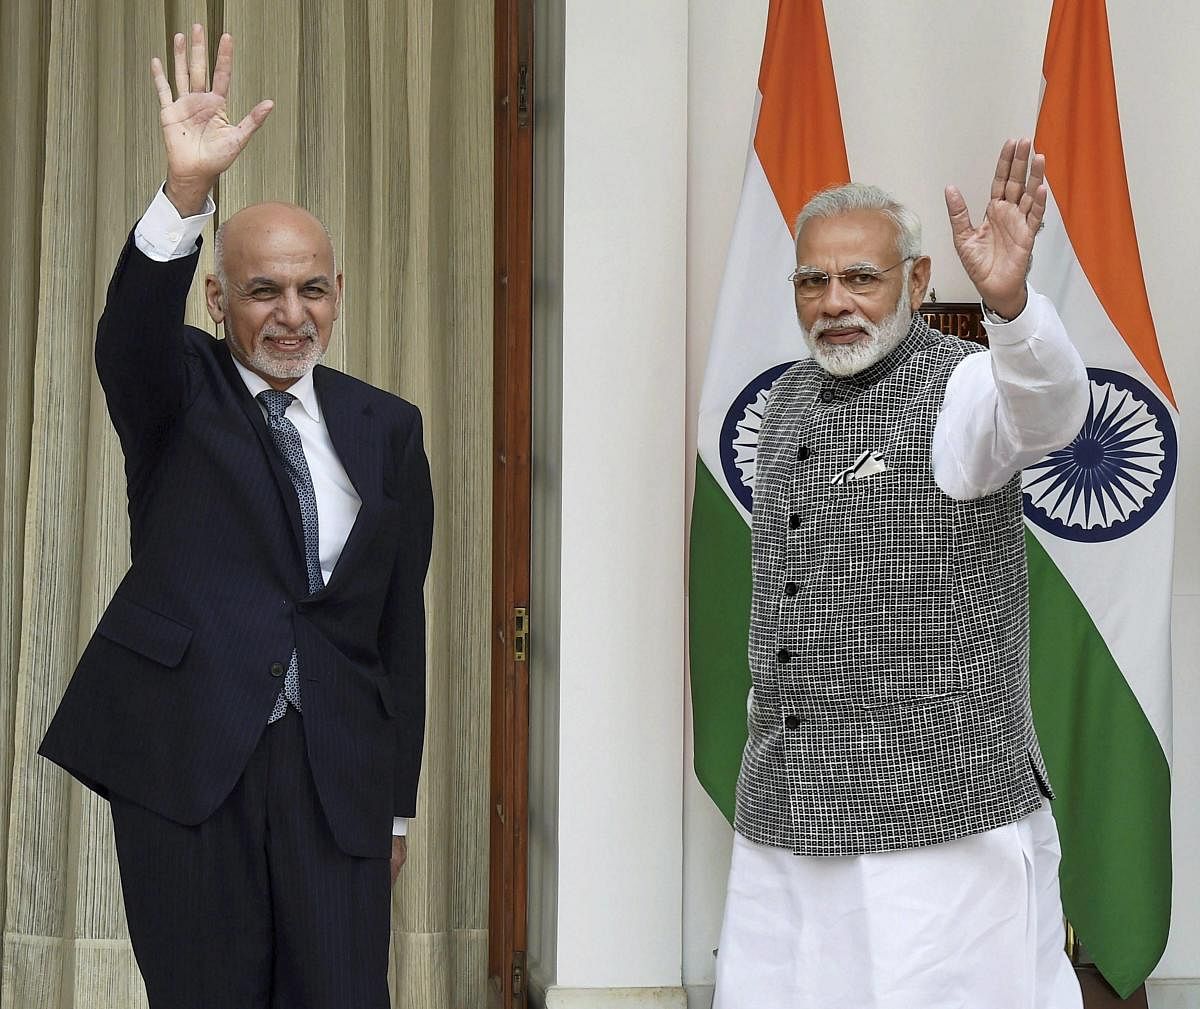 Prime Minister Narendra Modi and the President of the Islamic Republic of Afghanistan, Mohammad Ashraf Ghani,